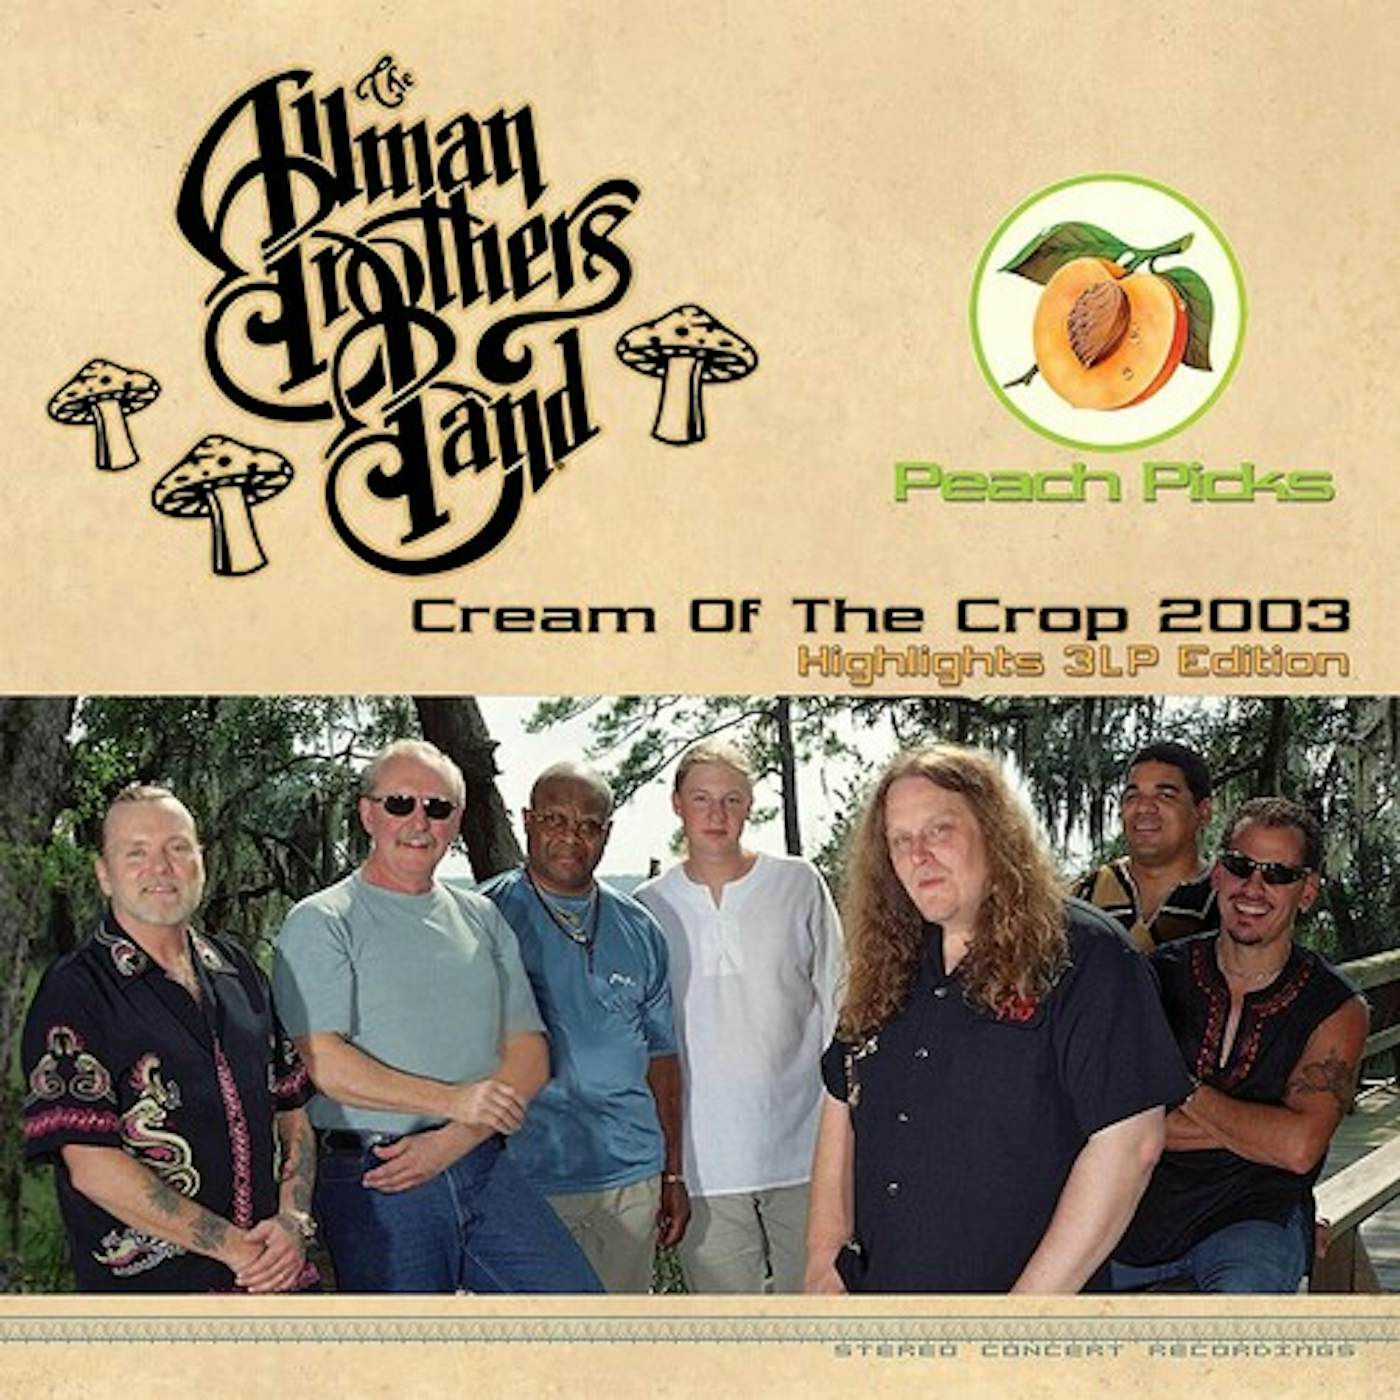 Allman Brothers Band Cream Of The Crop 2003 - Highlights Vinyl Record